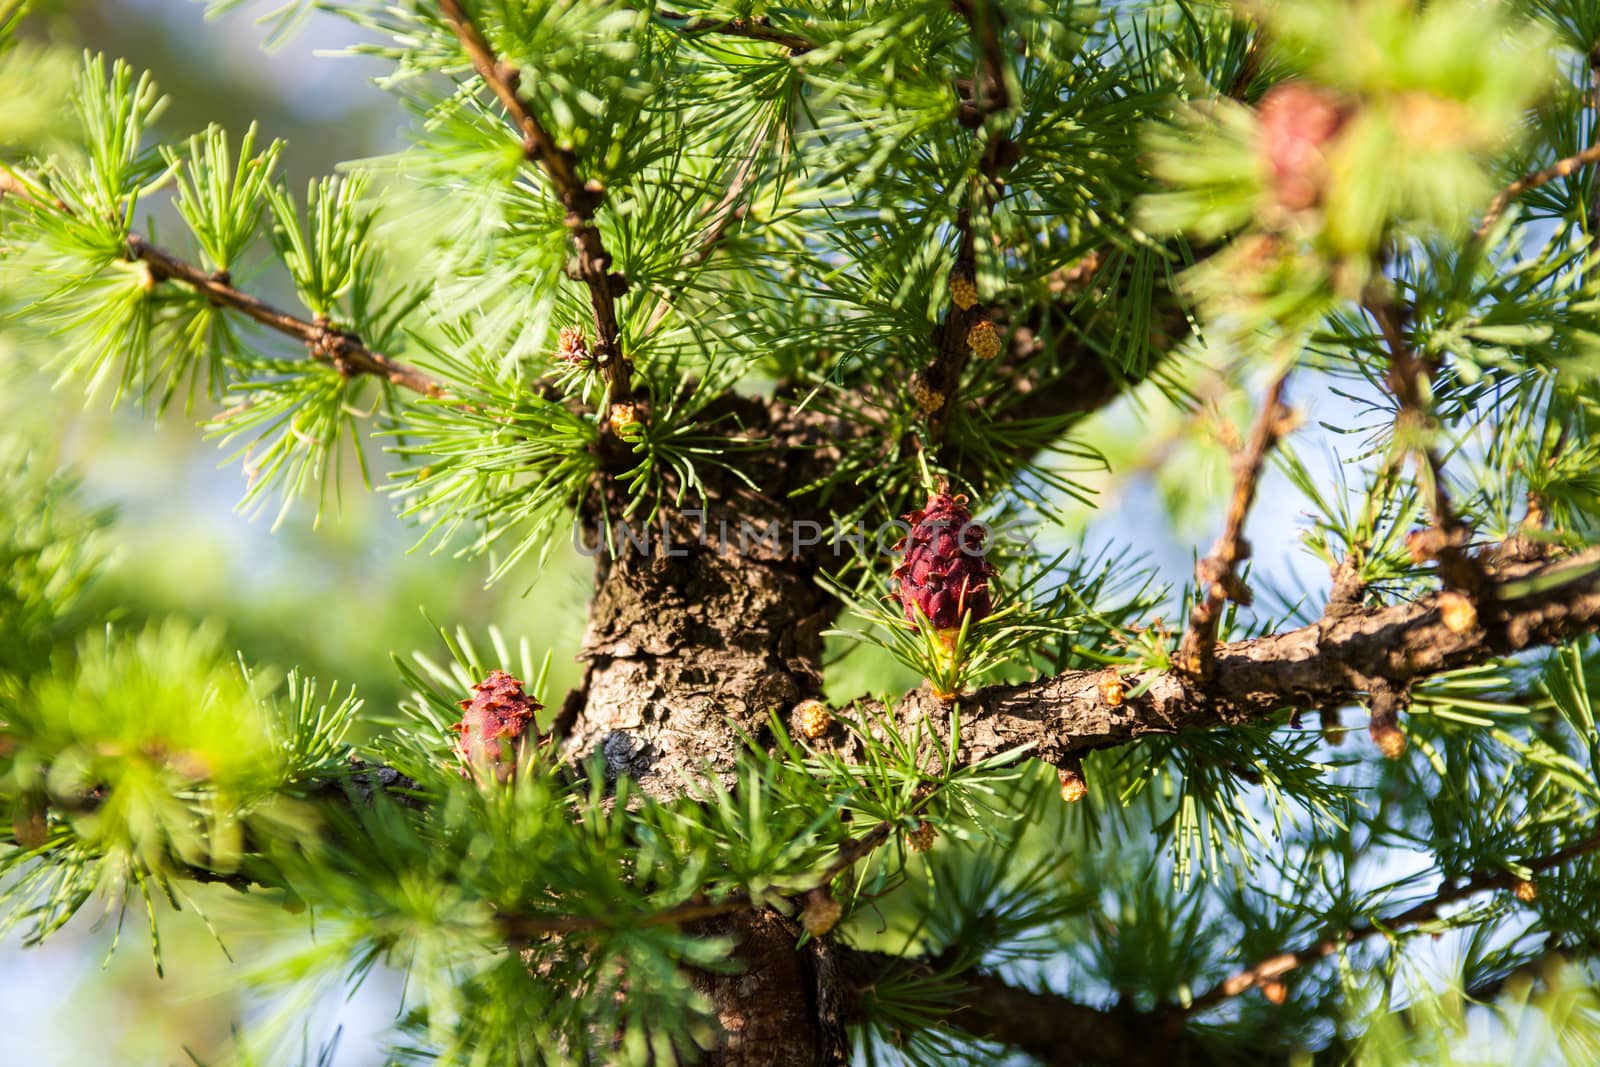 Pine branches with female seed cones and male pollen cones